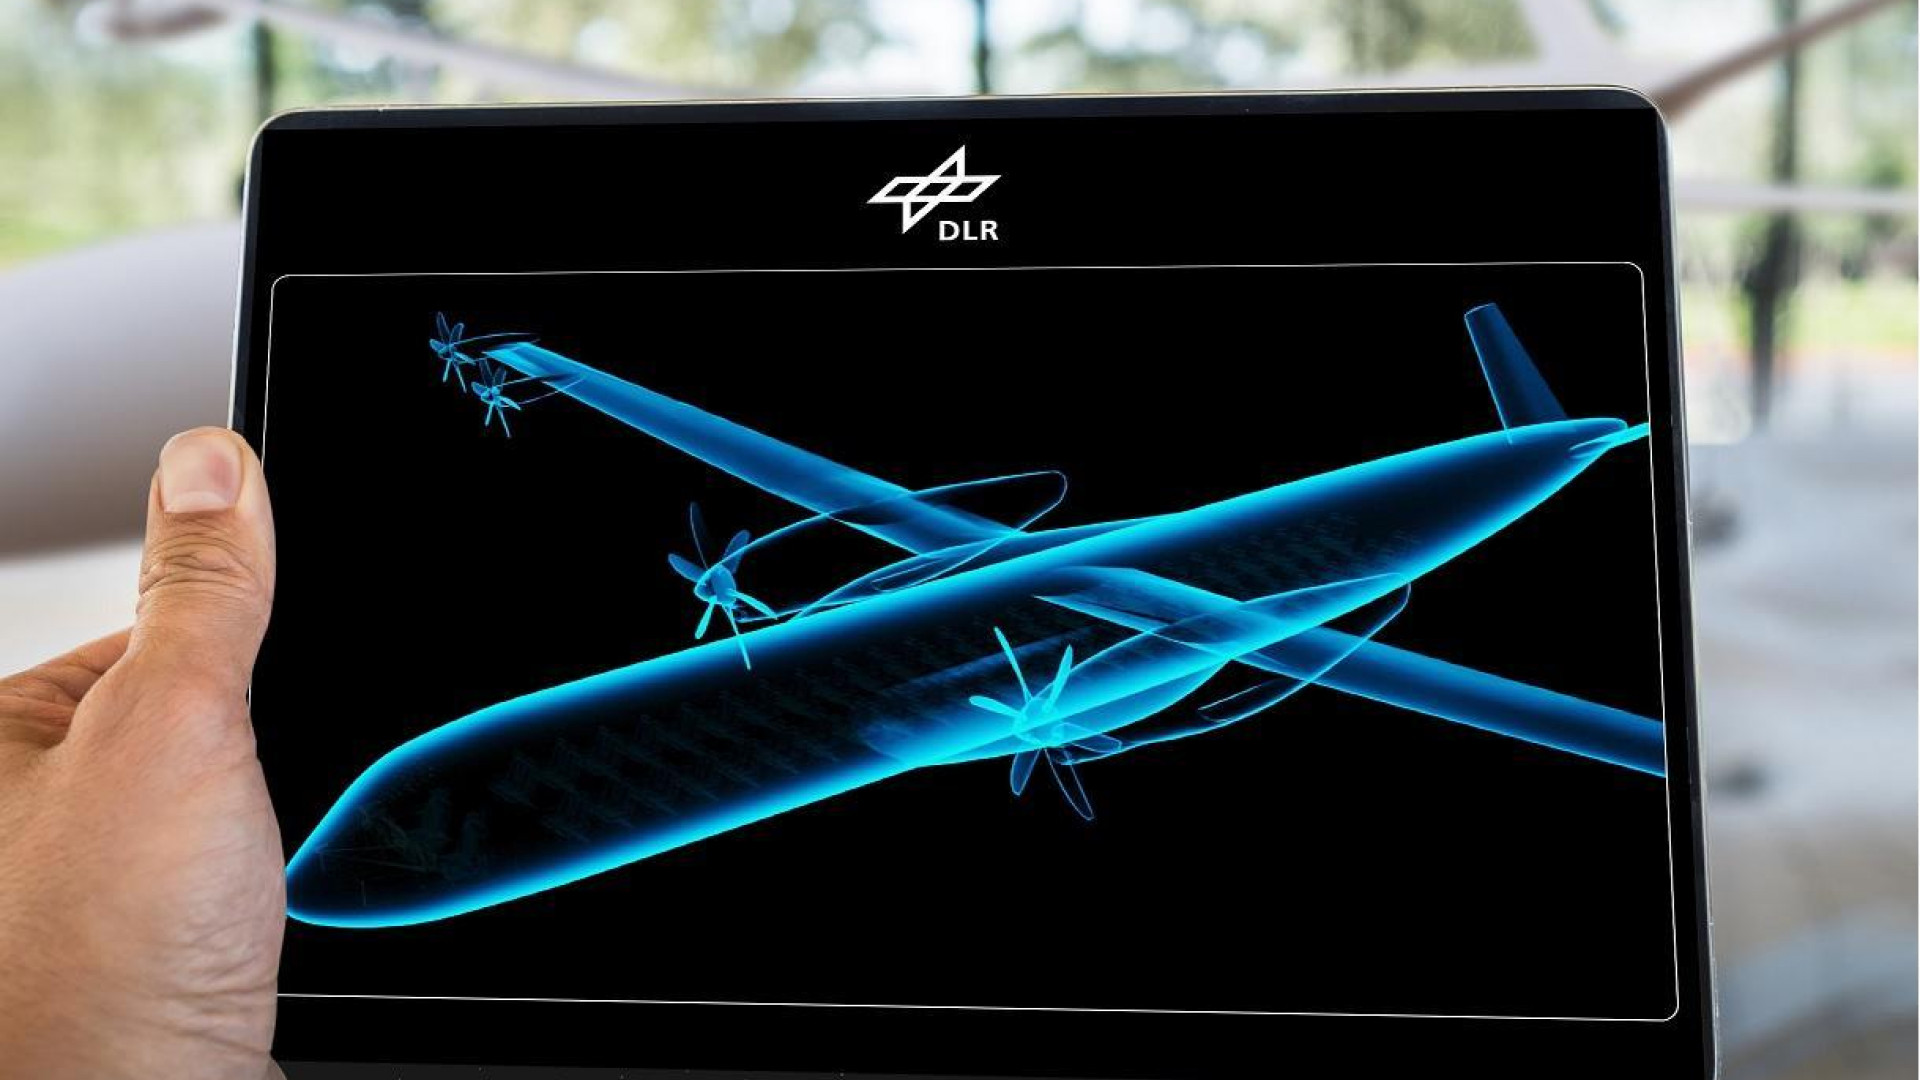 A futuristic blue aircraft silhouette on a tablet computer, held by a hand.